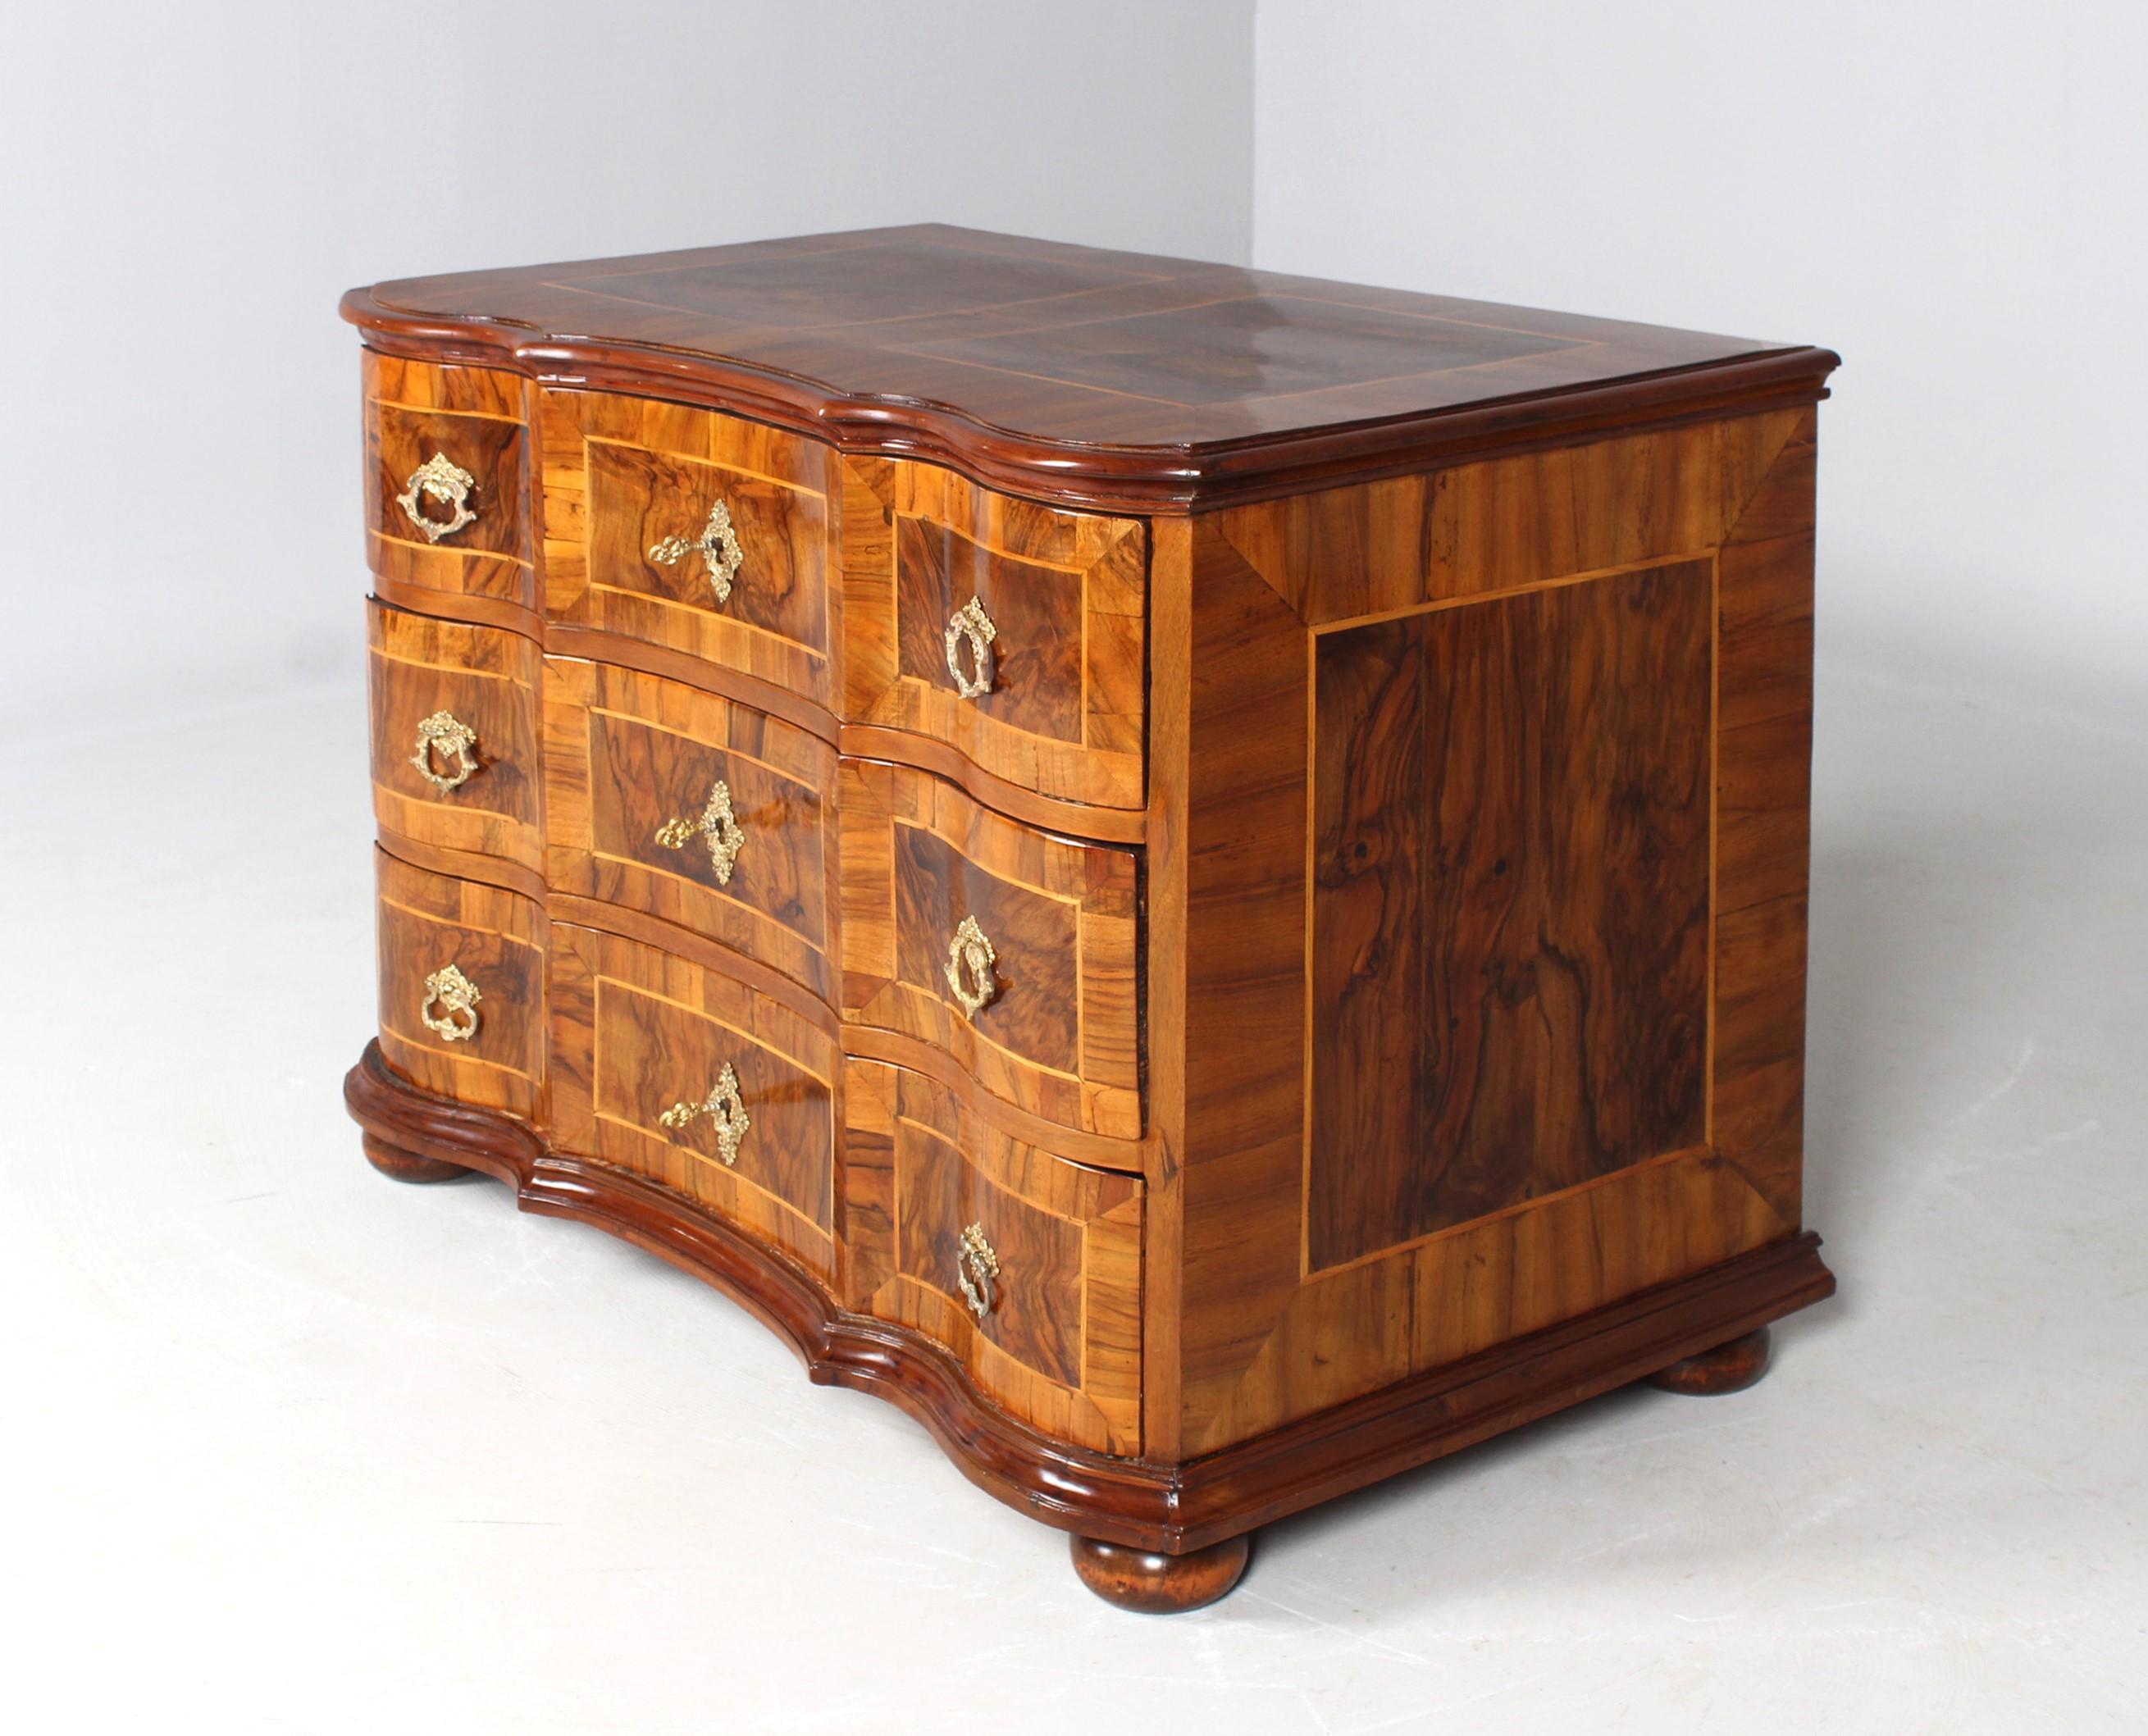 Antique baroque chest of drawers from the 18th century

Middle Germany
Walnut
Baroque around 1760

Dimensions: H x W x D: 78 x 106 x 63 cm

Description:
Three-bowl piece of furniture standing on squeeze feet.
Multiple curved and buckled